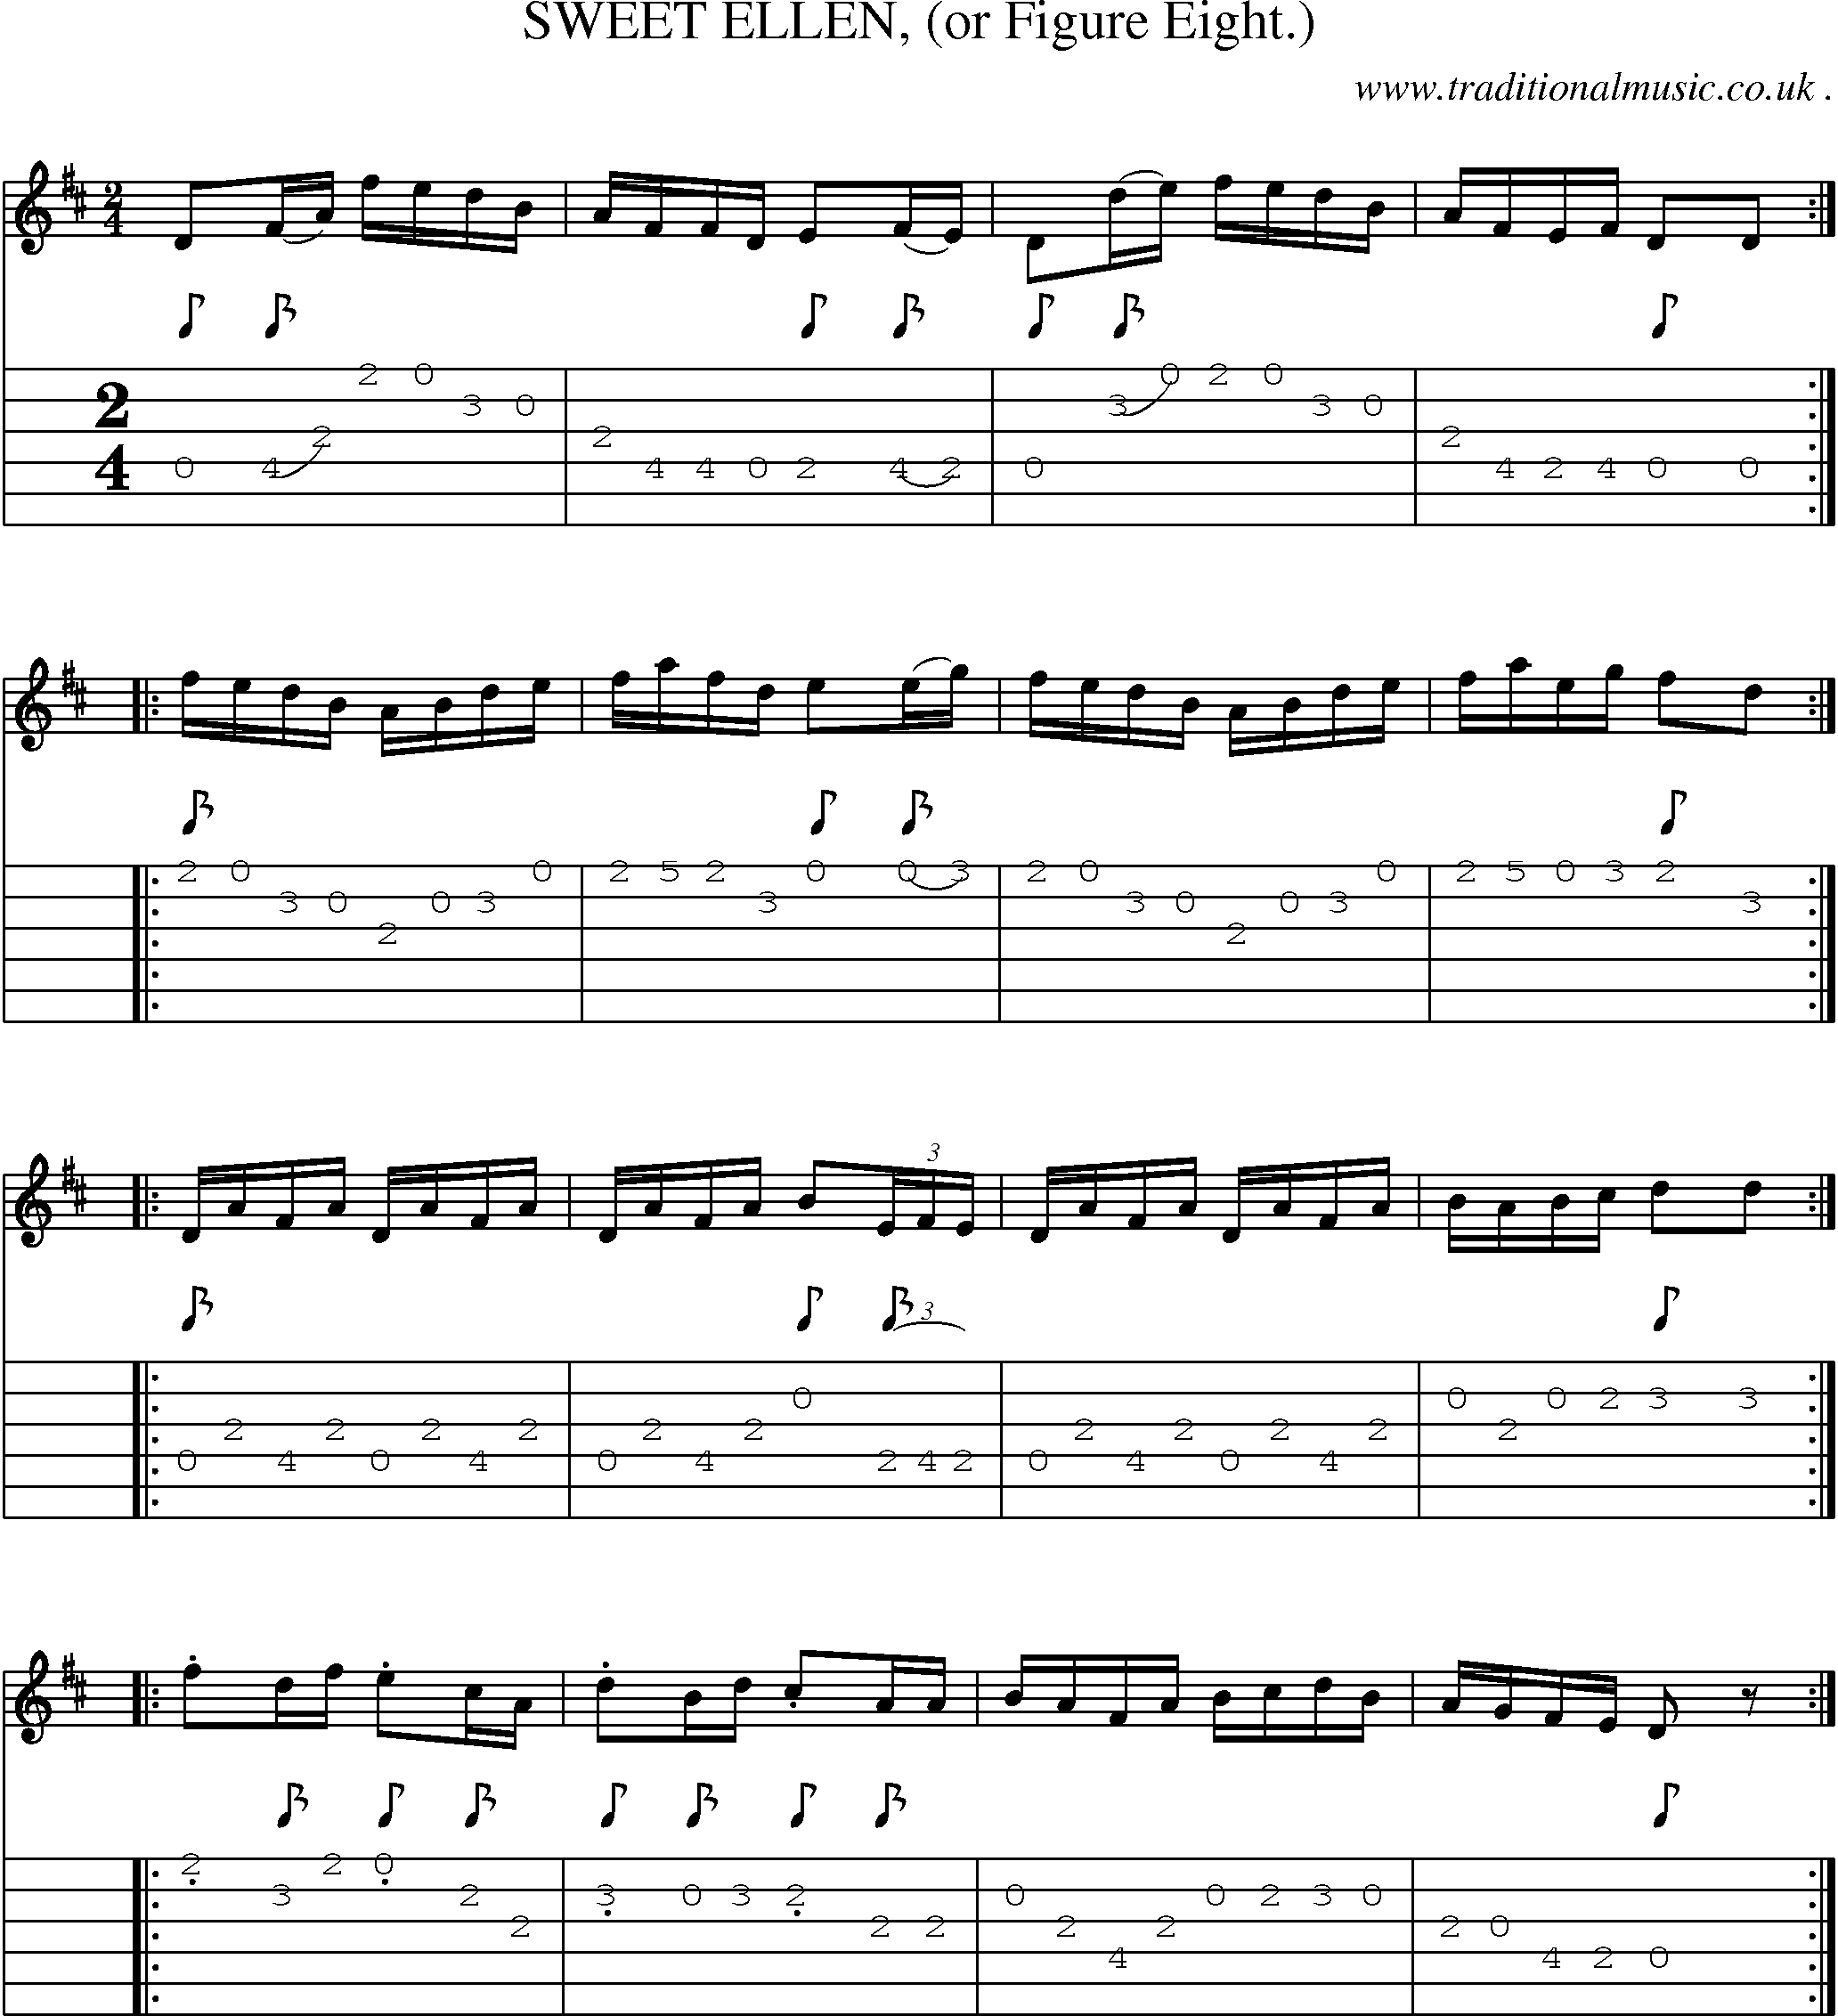 Sheet-Music and Guitar Tabs for Sweet Ellen (or Figure Eight)